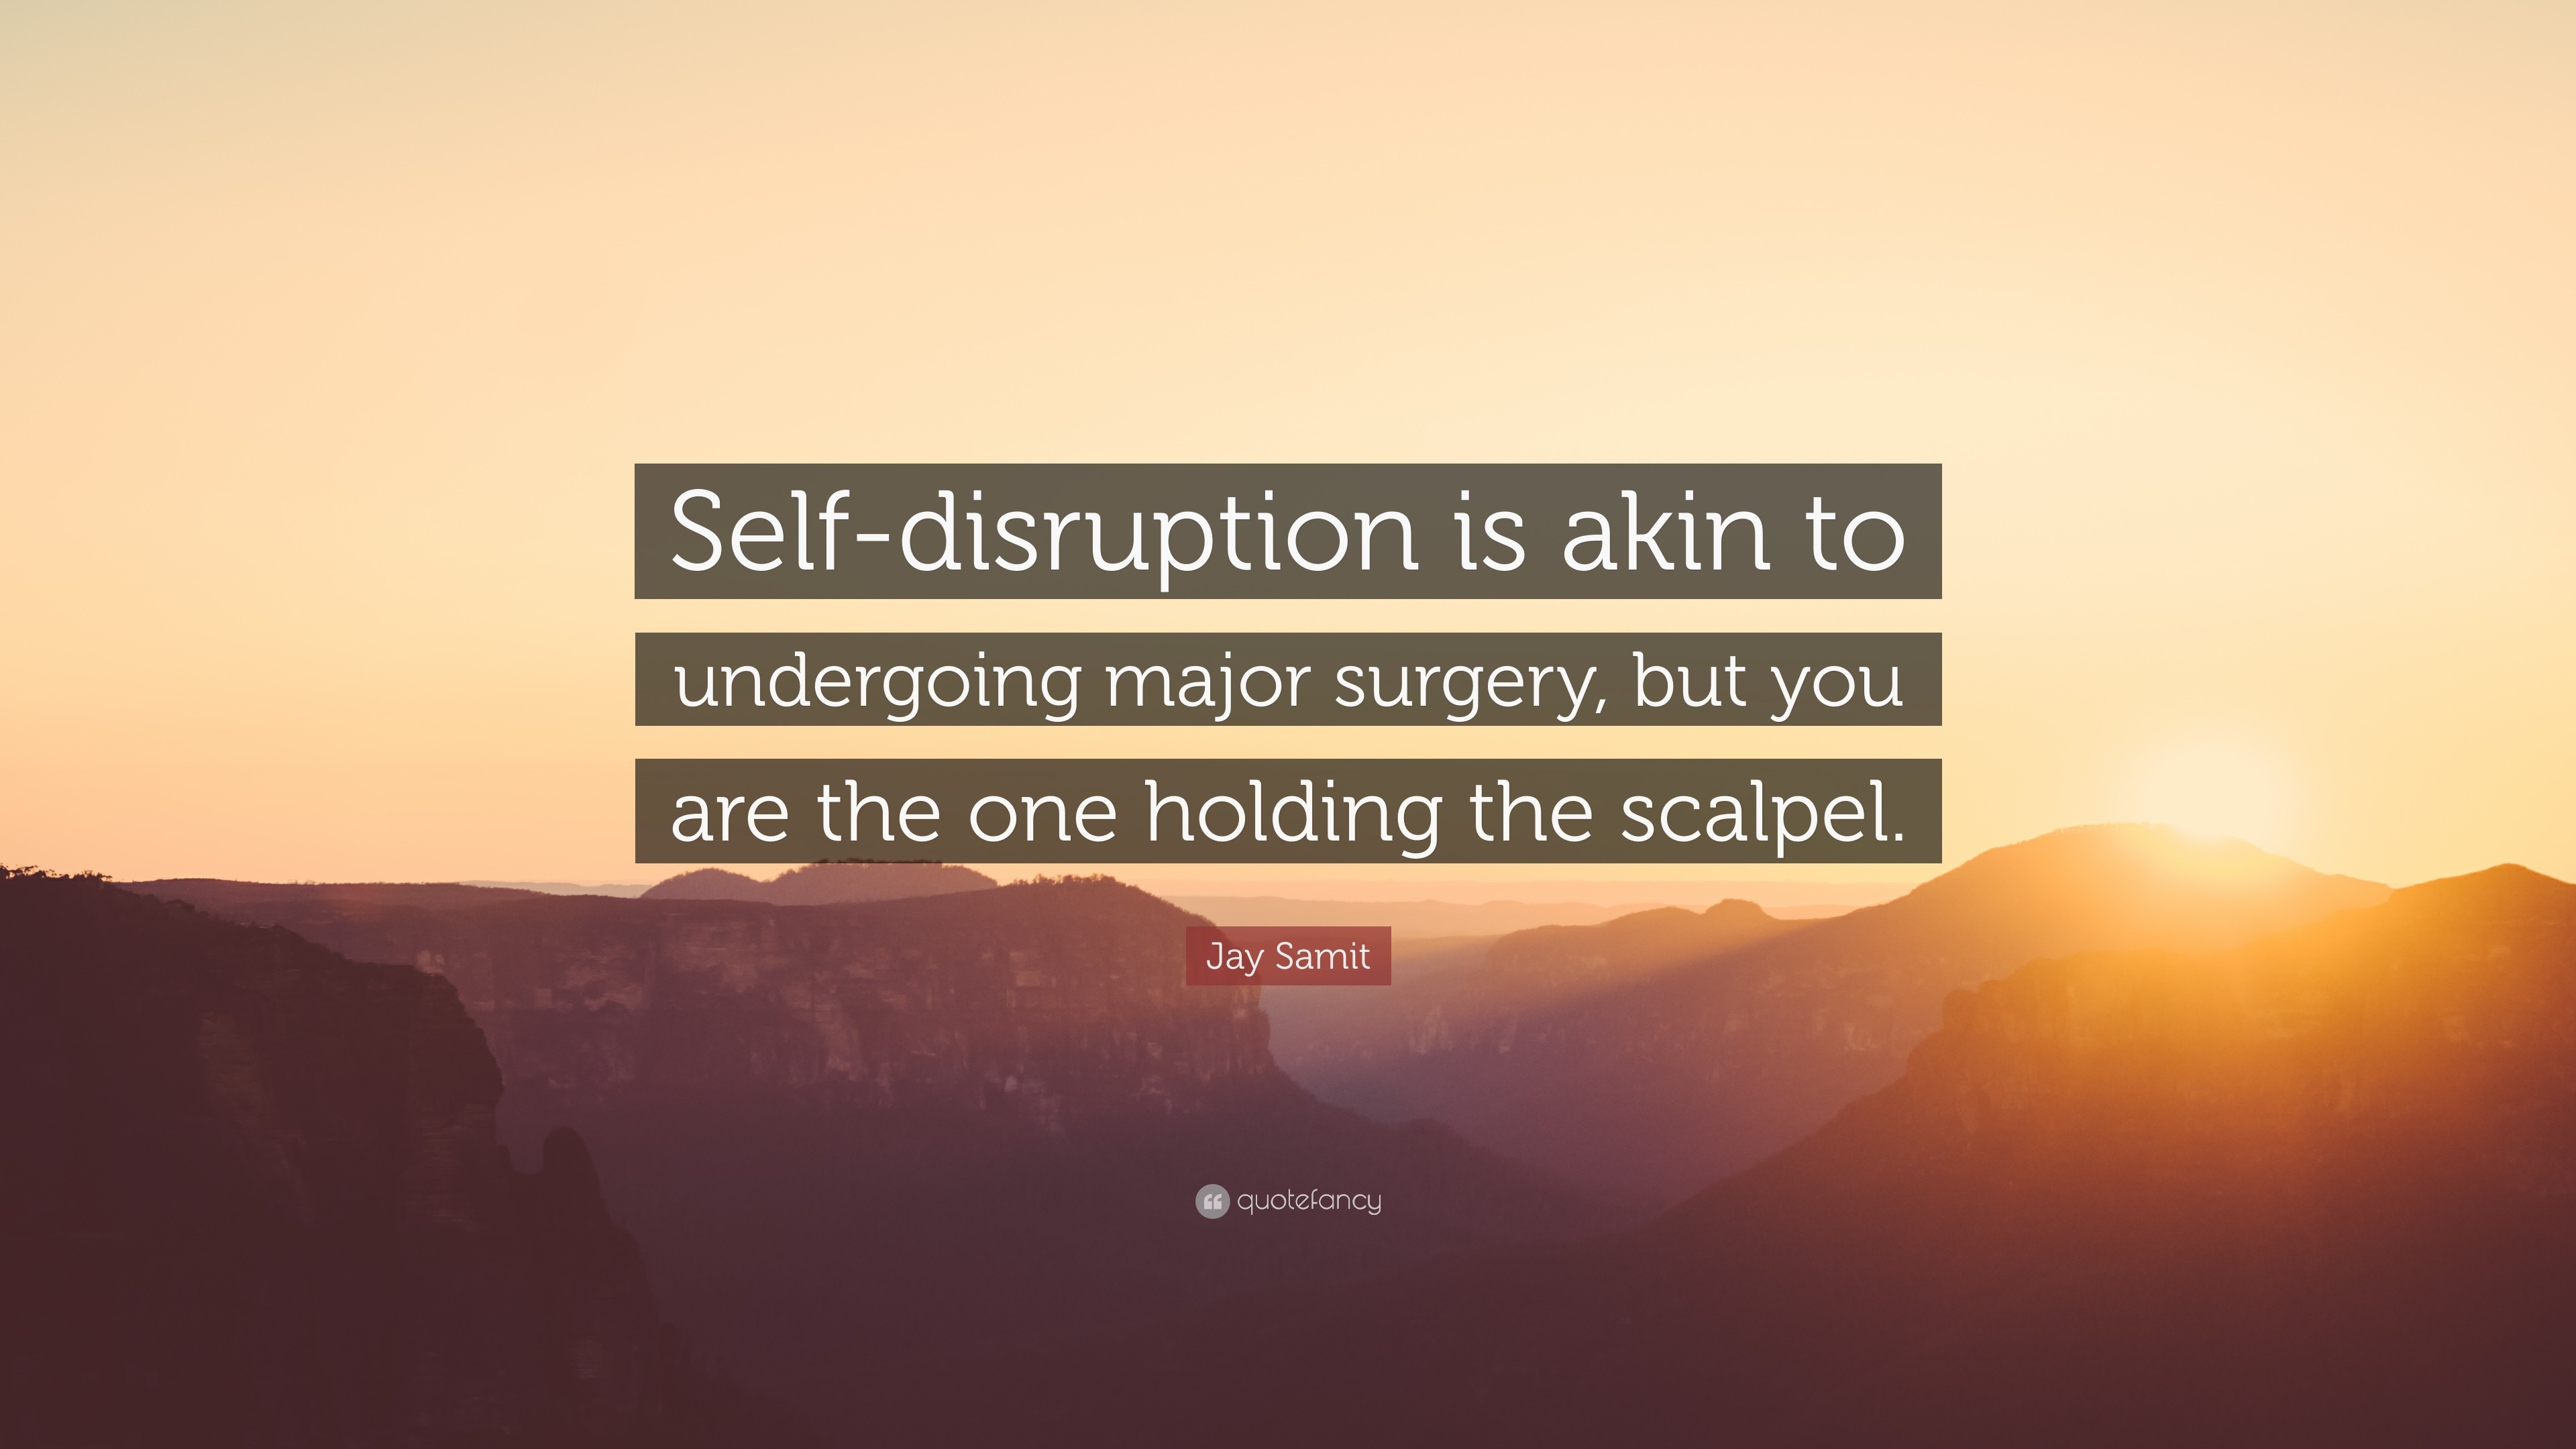 3840x2160 Jay Samit Quote: “Self-disruption is akin to undergoing major surgery, but